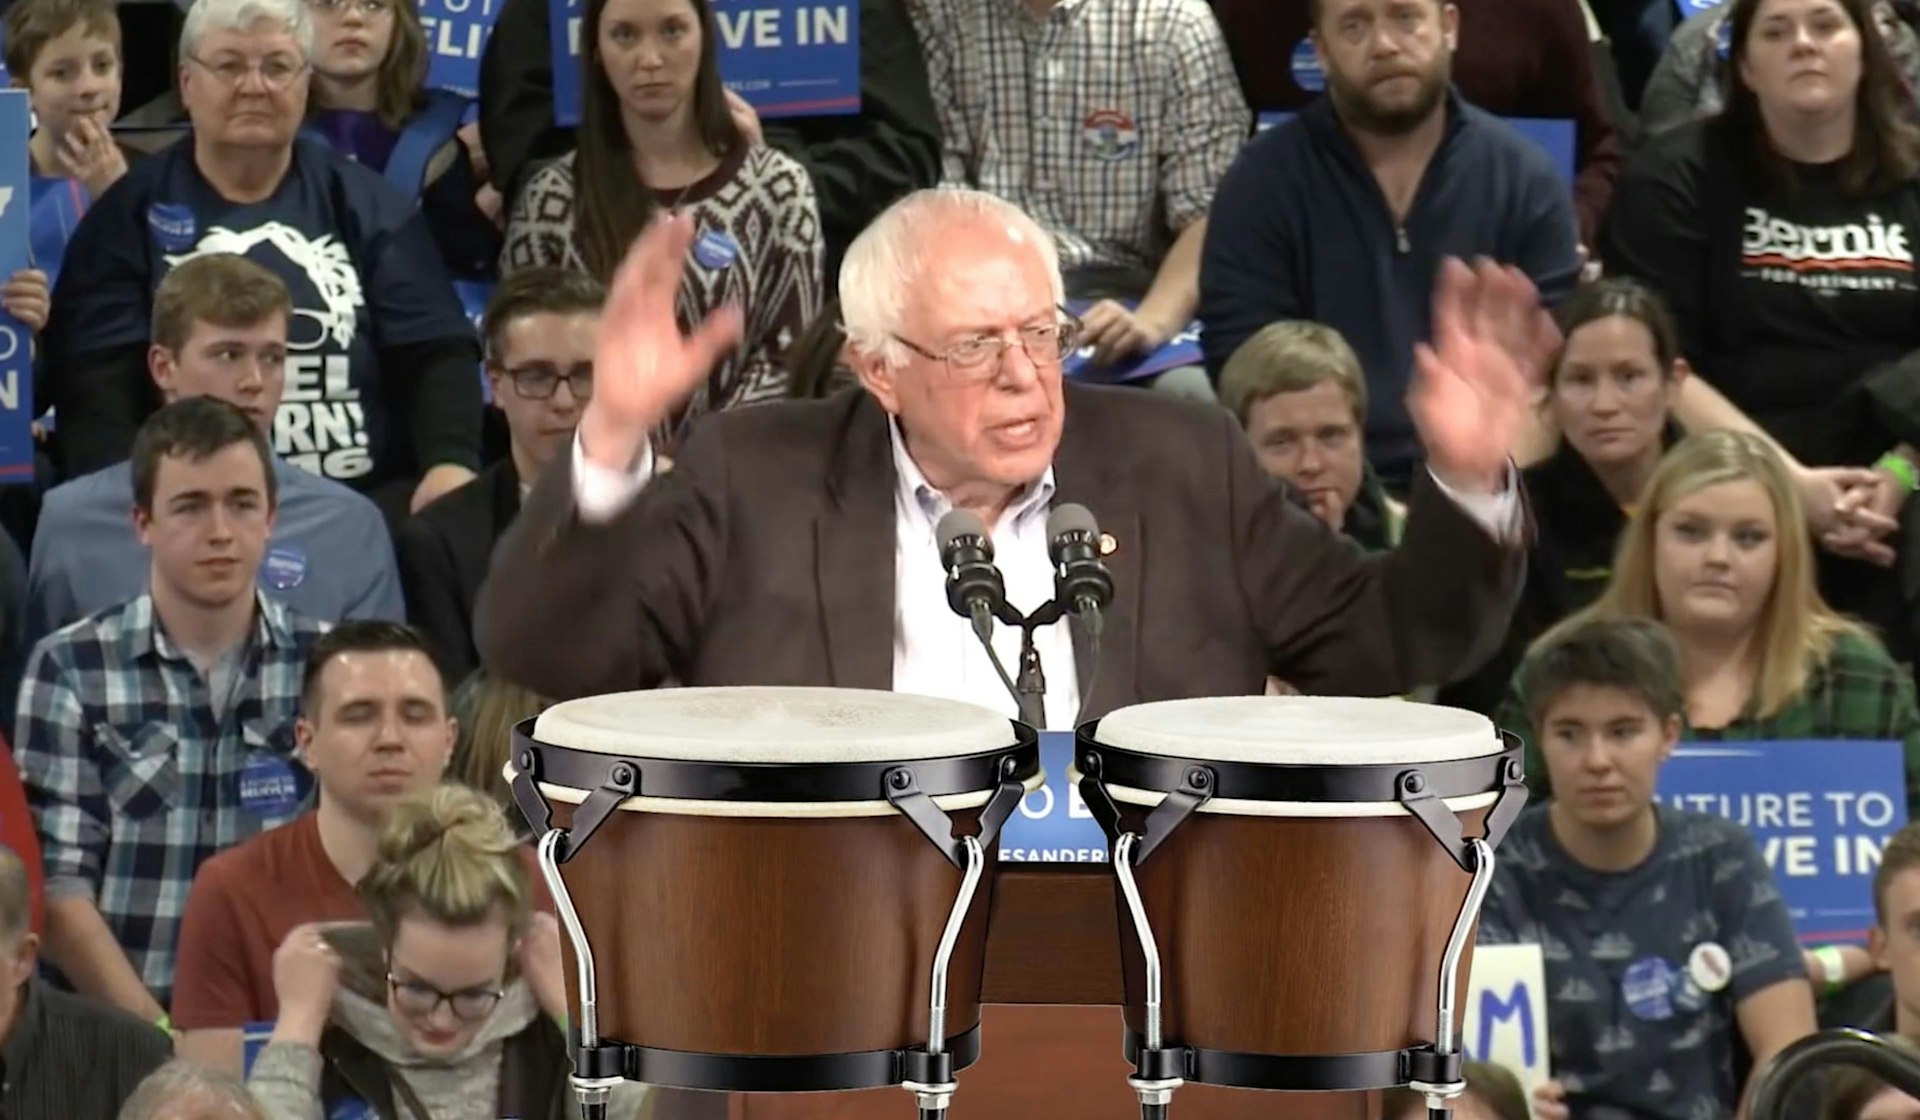 Video: Everything you need to know about Bernie Sanders - in a hilarious bongo rap